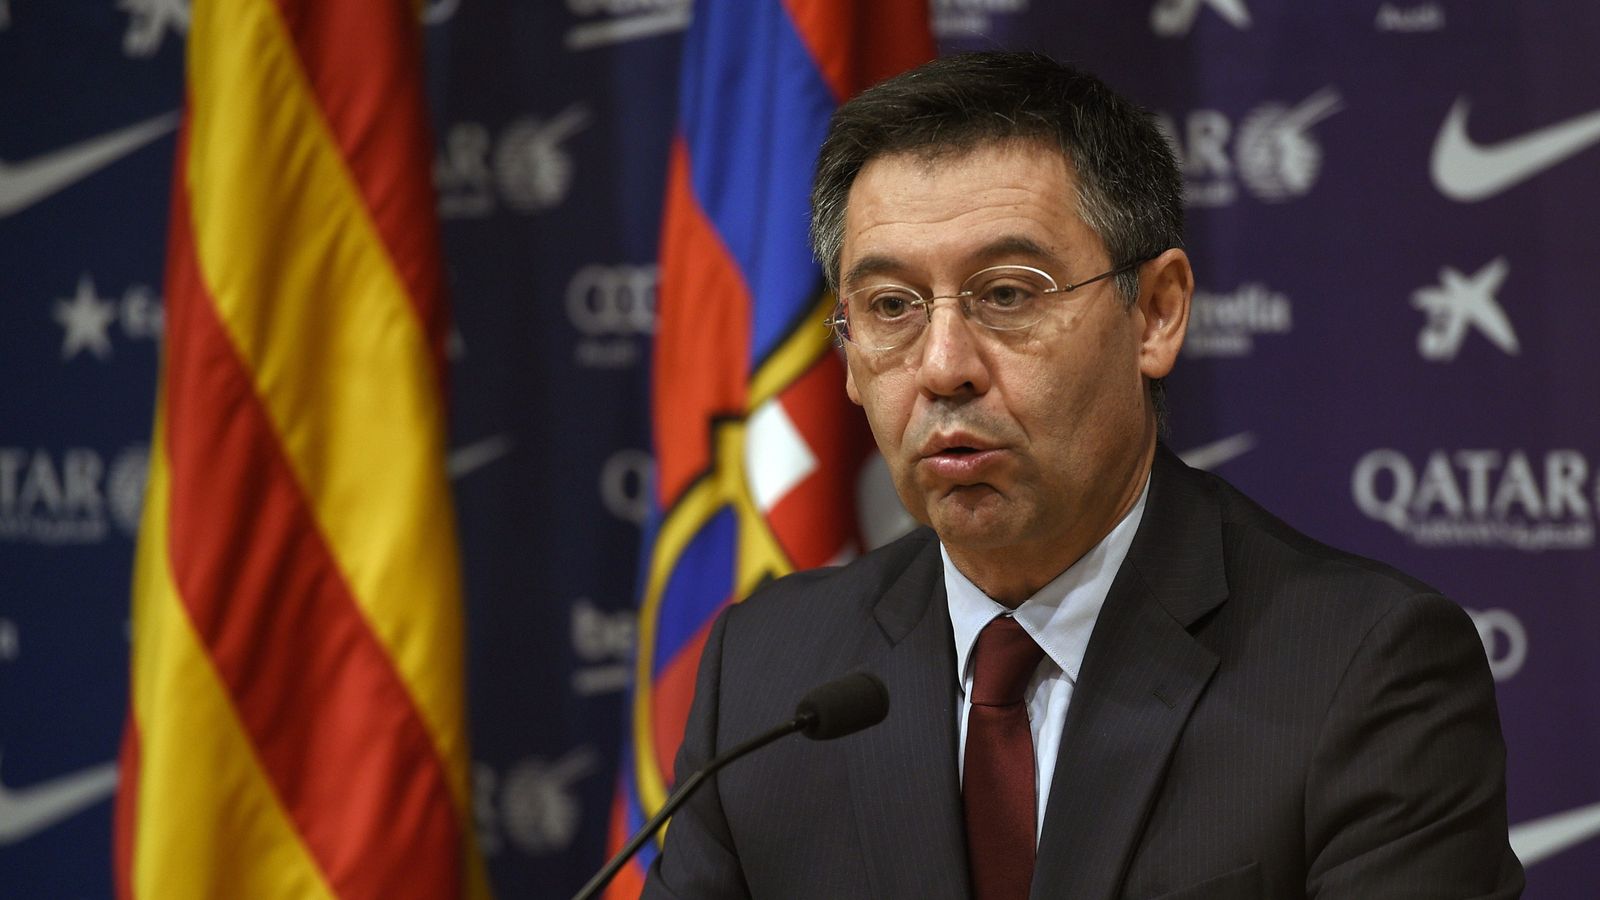 FC Barcelona in crisis, Bartomeu Departure Could Affect the Future of Messi